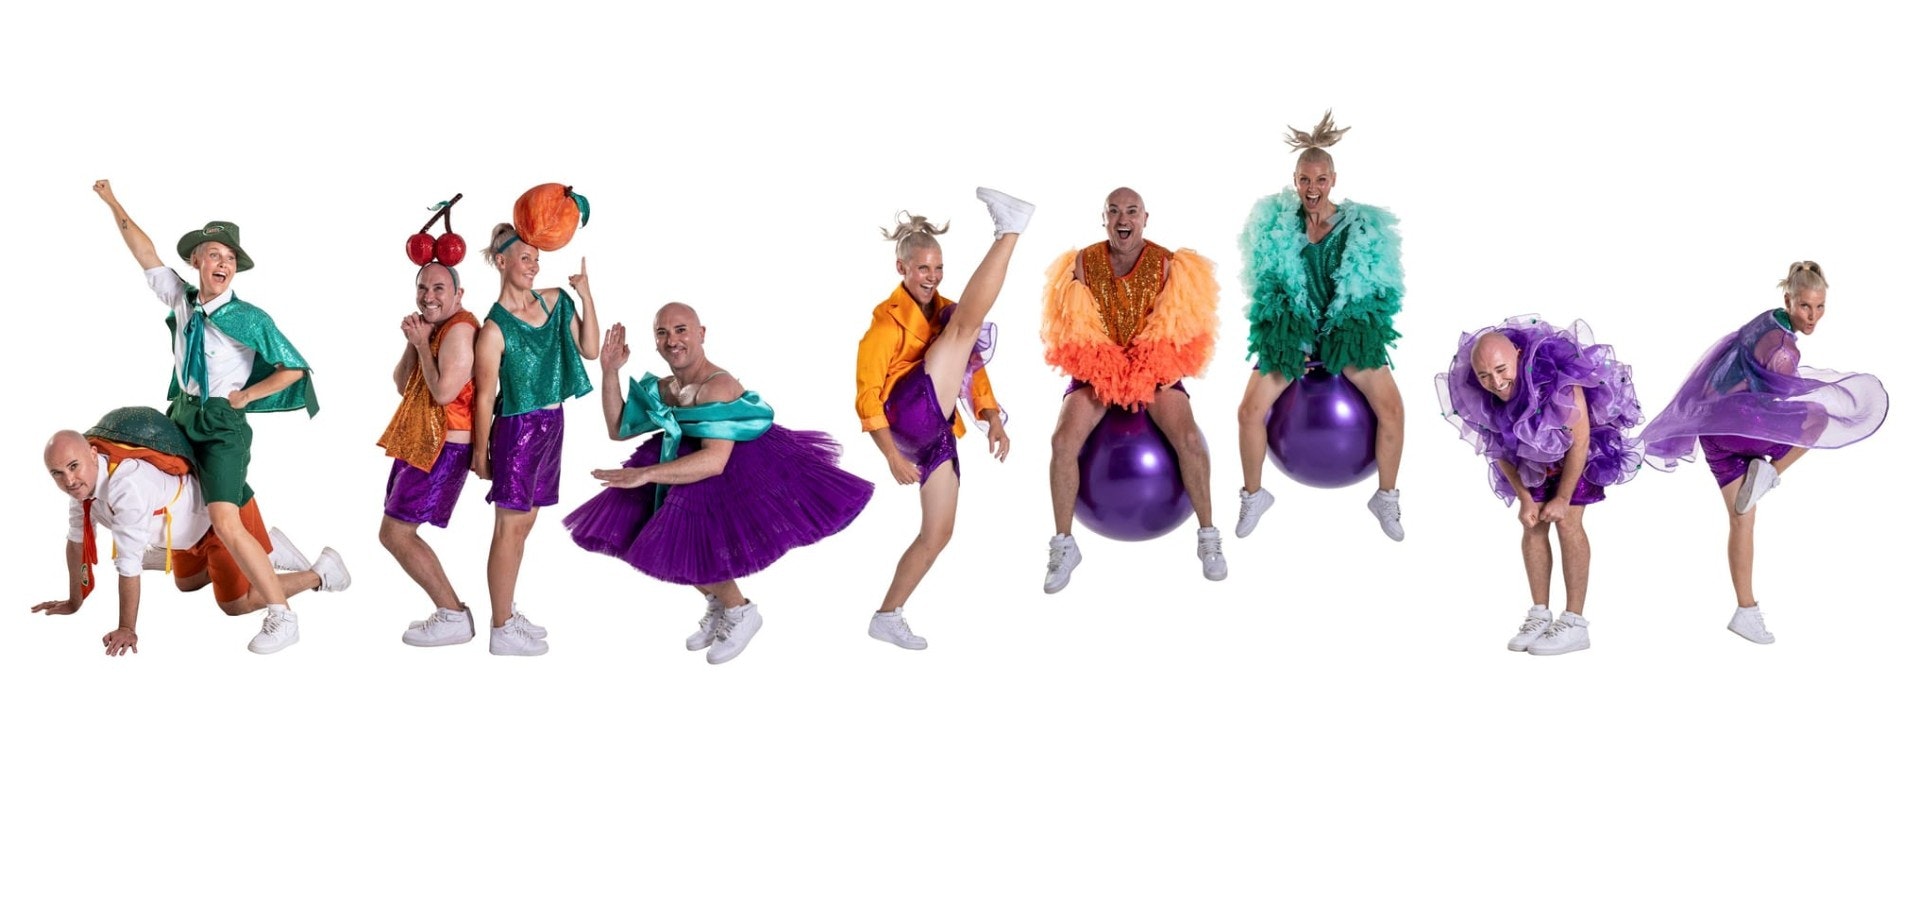 A row of repeated images of two people, dressed brightly in orange and teal, dancing and bouncing on a purple fit ball. A colourful fun line-up of characters